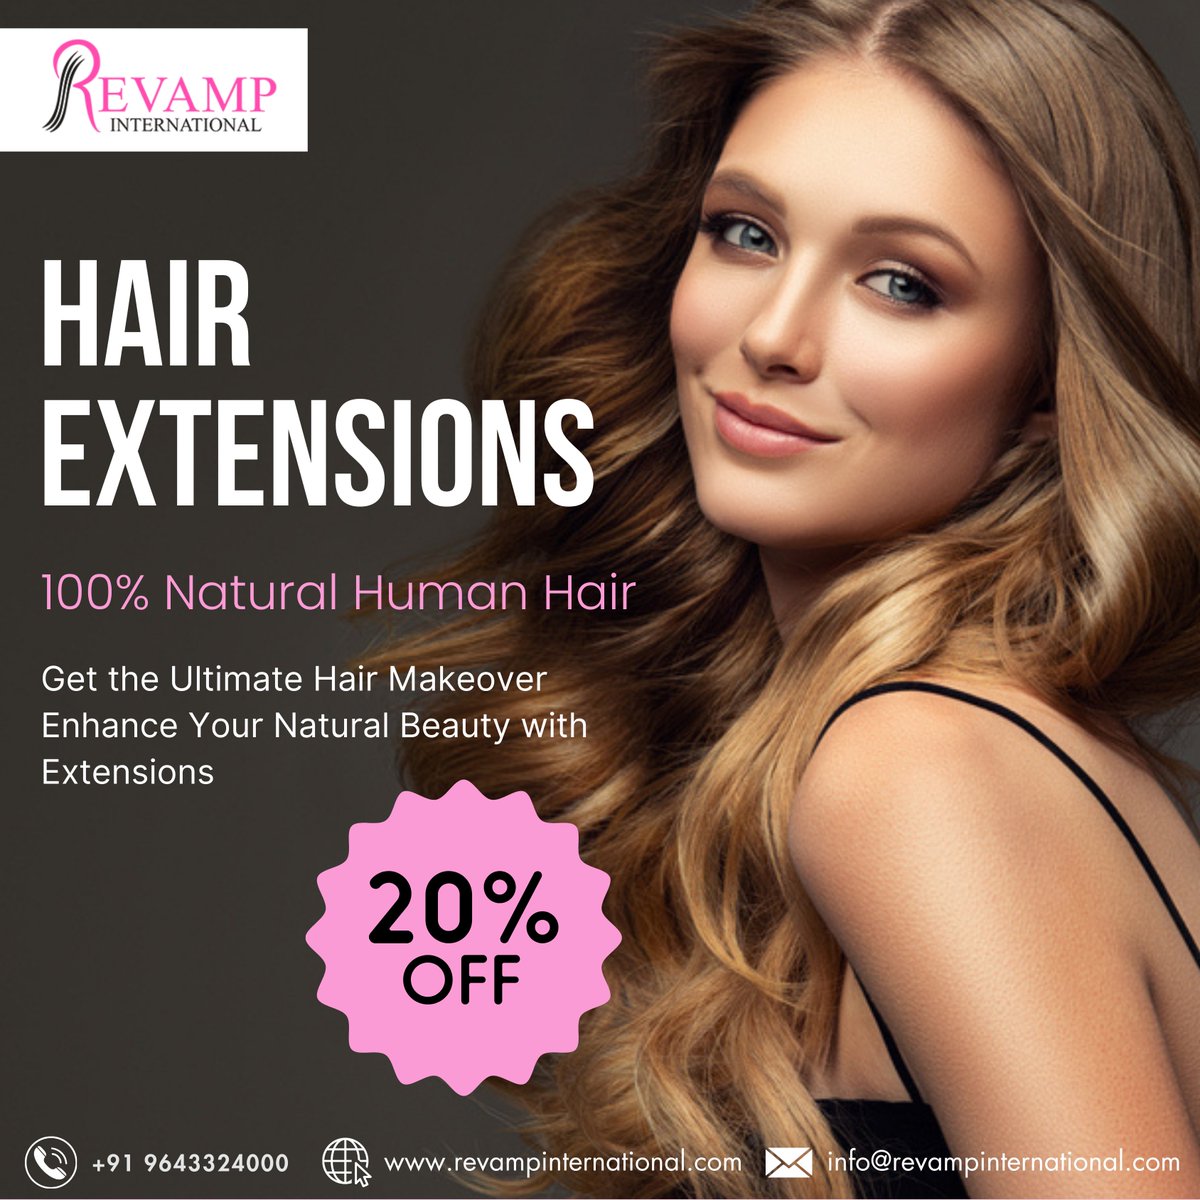 Experience the magic of real hair extensions!

Say goodbye to synthetic and hello to natural beauty!

We have stores in Delhi, Noida, Ghaziabad and Mumbai.

#realhairmagic #hairessentials #humanhairextensions #explorenow #humanhairextensions #hair #trending #Revampinternational